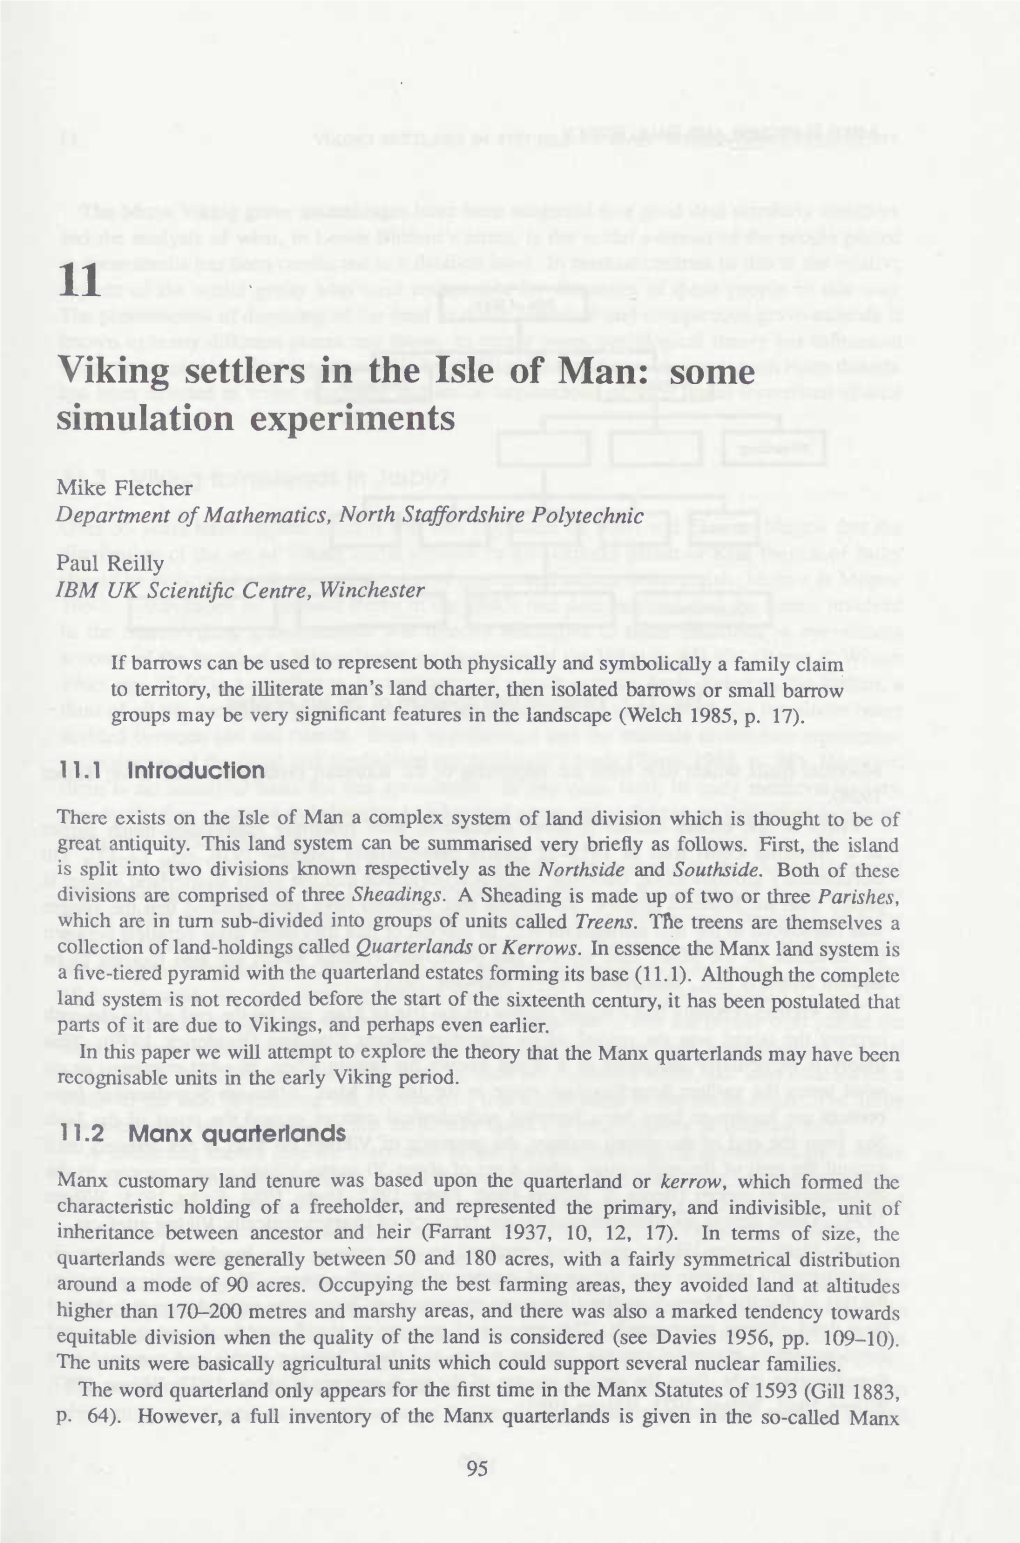 Viking Settlers in the Isle of Man: Some Simulation Experiments